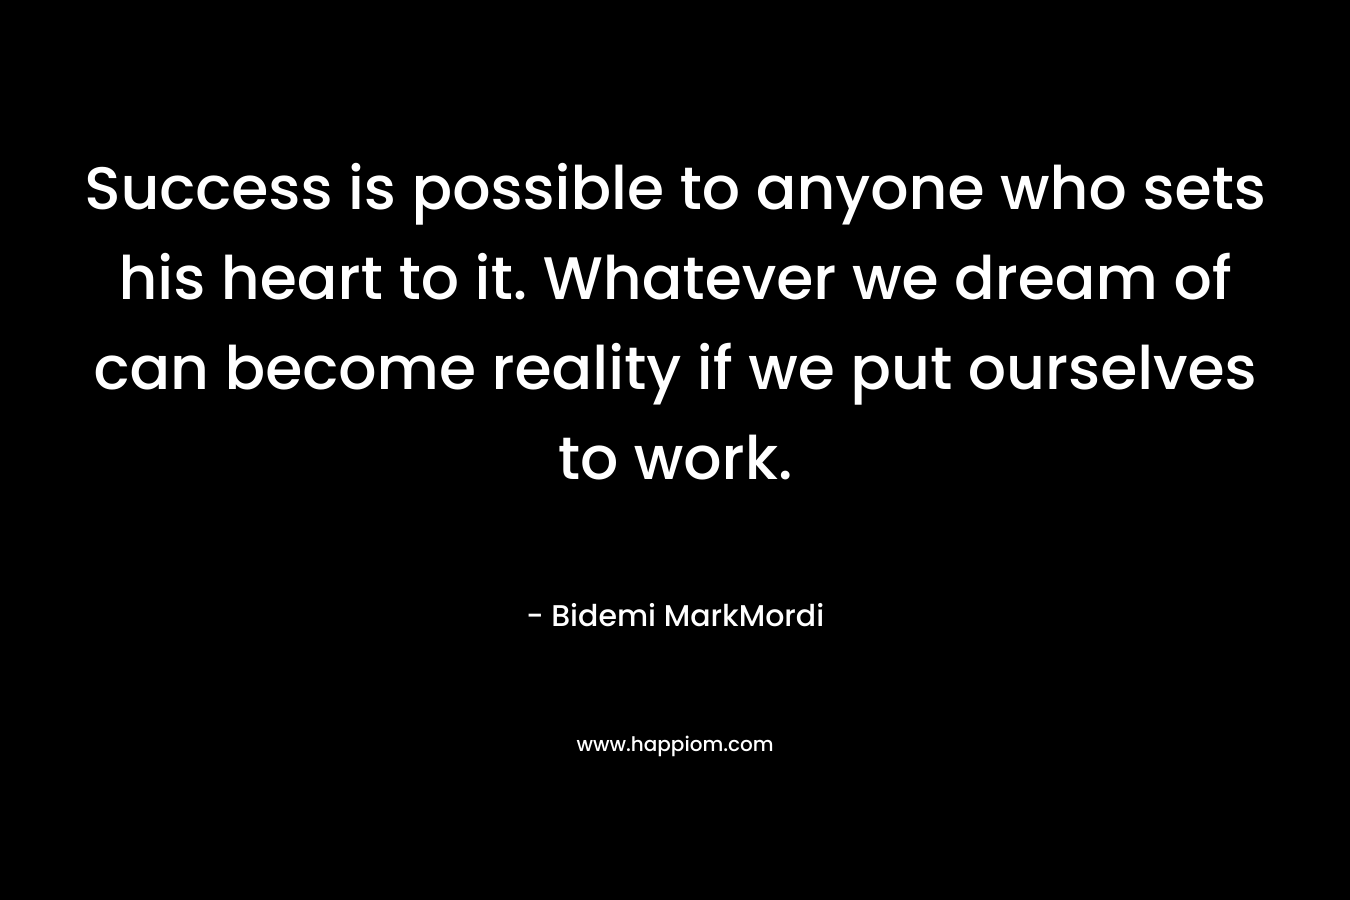 Success is possible to anyone who sets his heart to it. Whatever we dream of can become reality if we put ourselves to work.